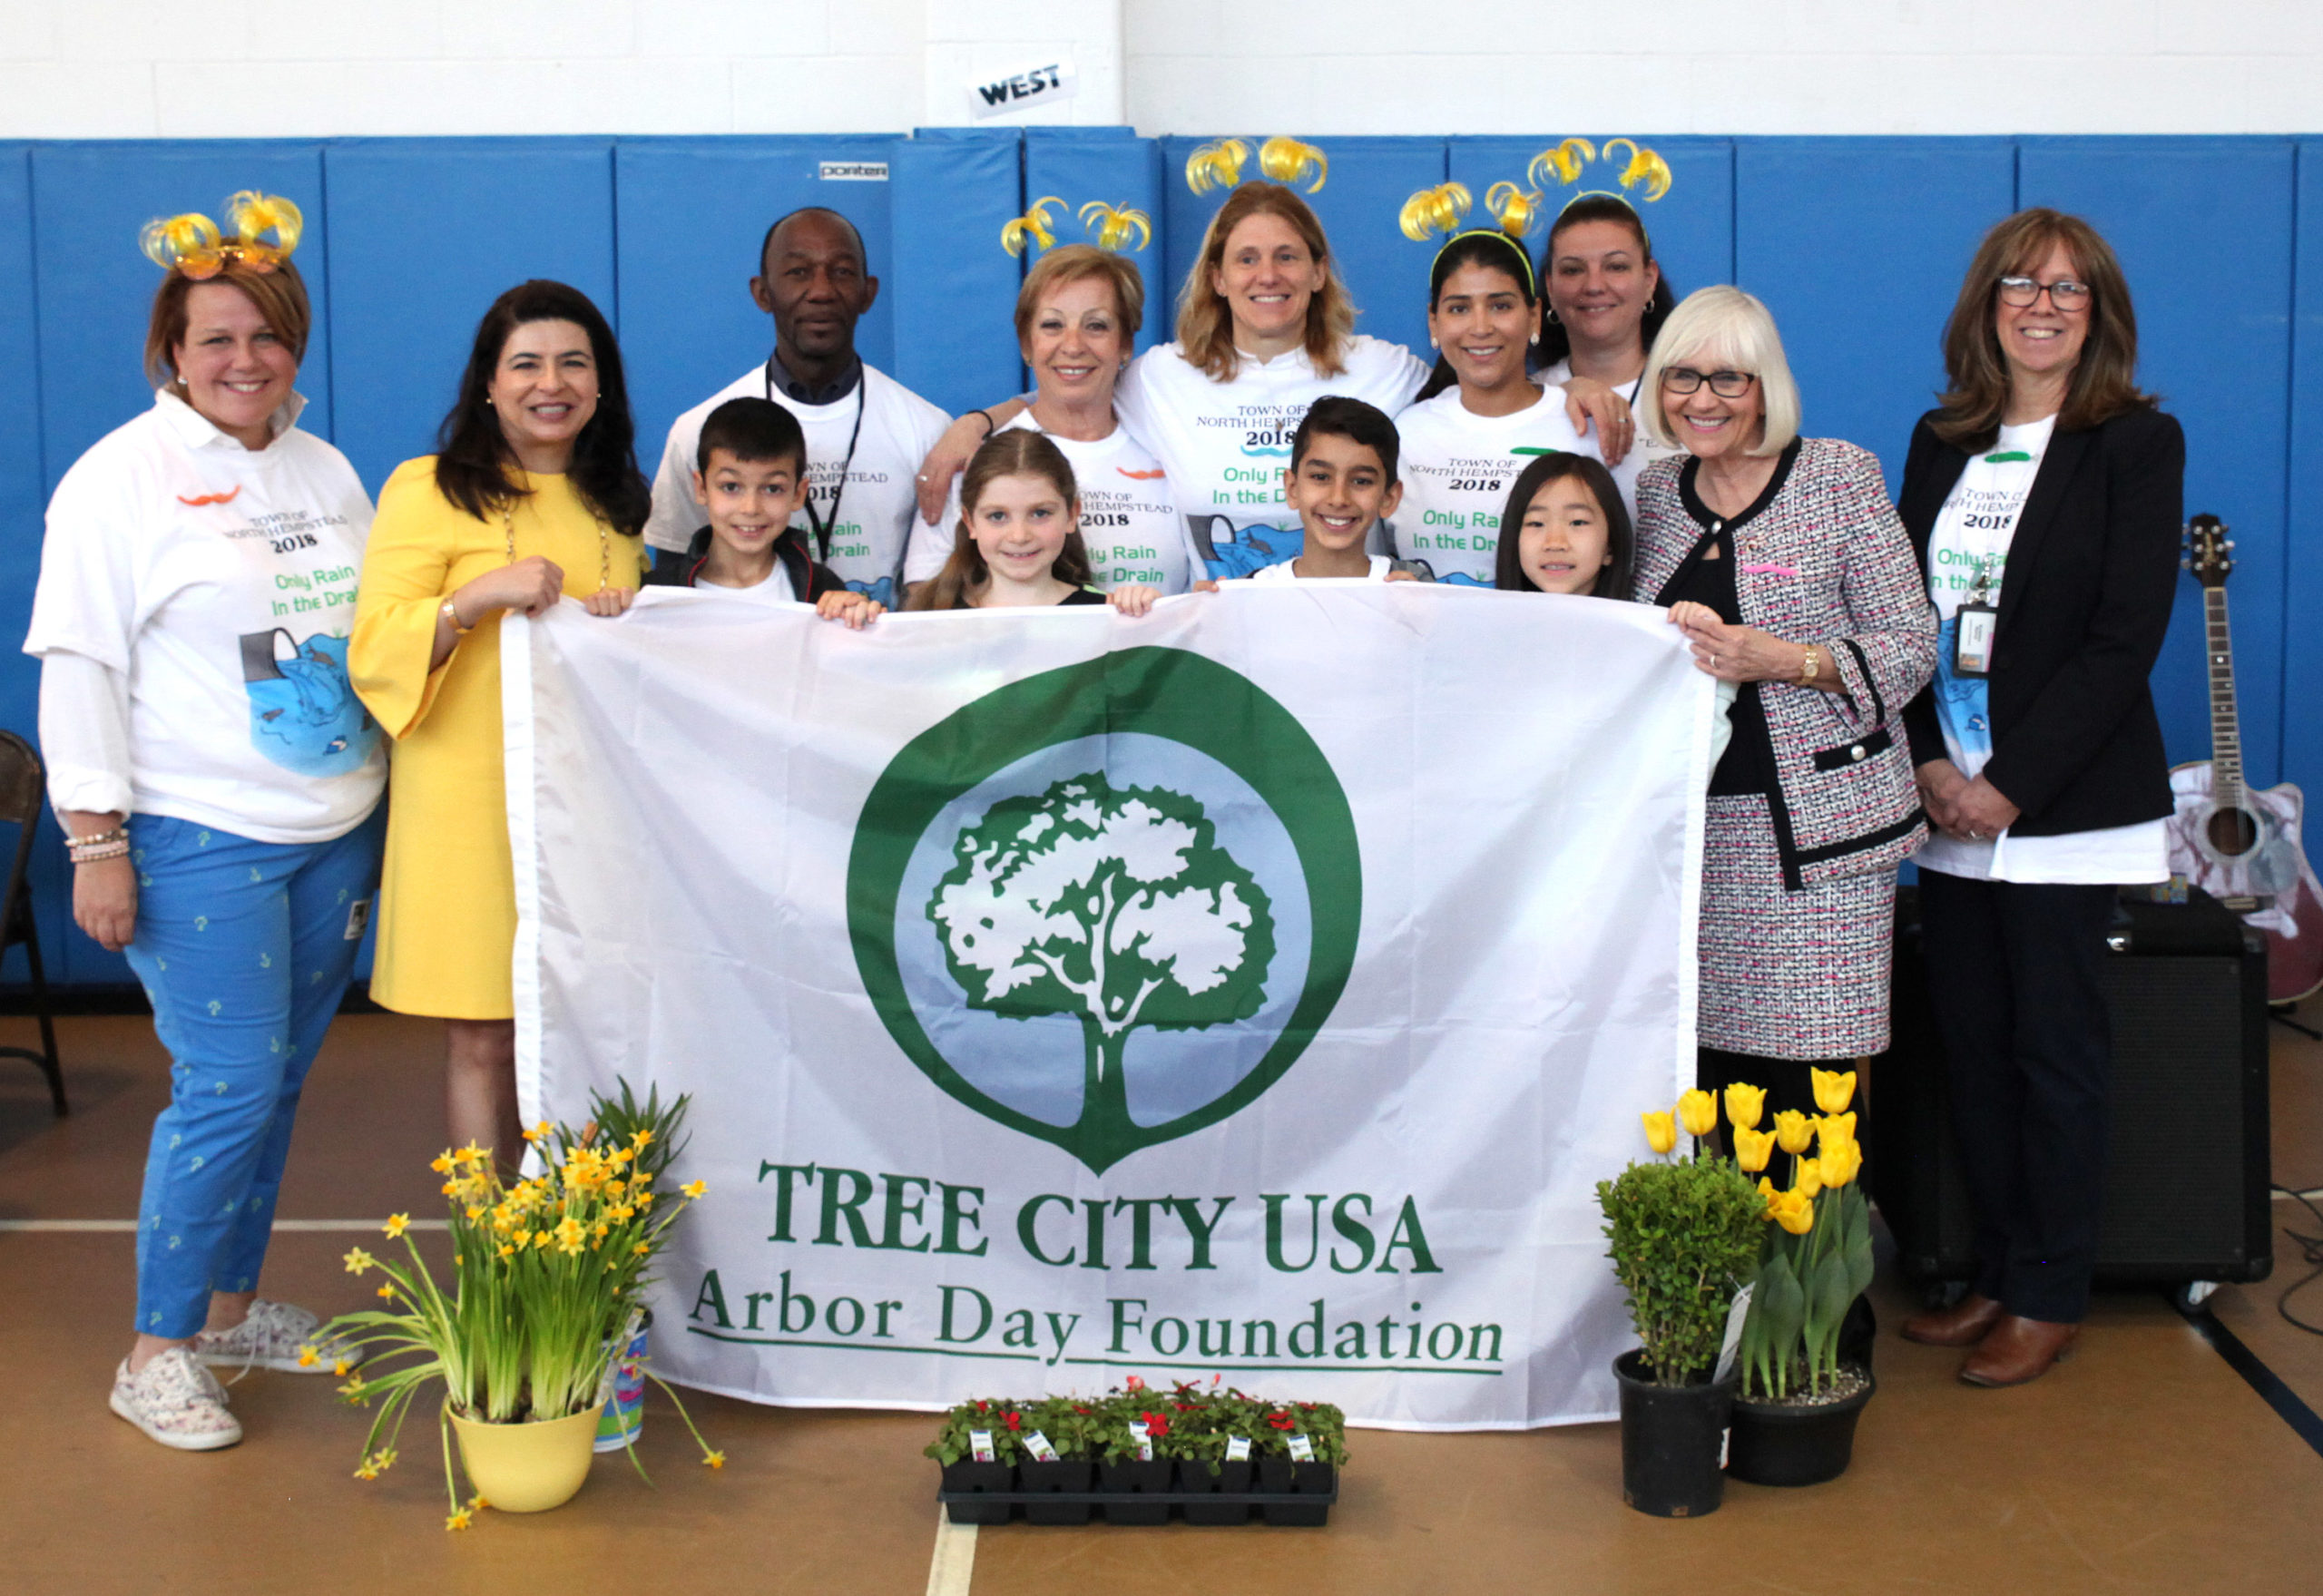 Supervisor Judi Bosworth and Council Member Anna Kaplan poses with students from Mrs. Ulmann’s third grade class and Assistant Principal Kathleen Murray. (Photo courtesy of the Town of North Hempstead)